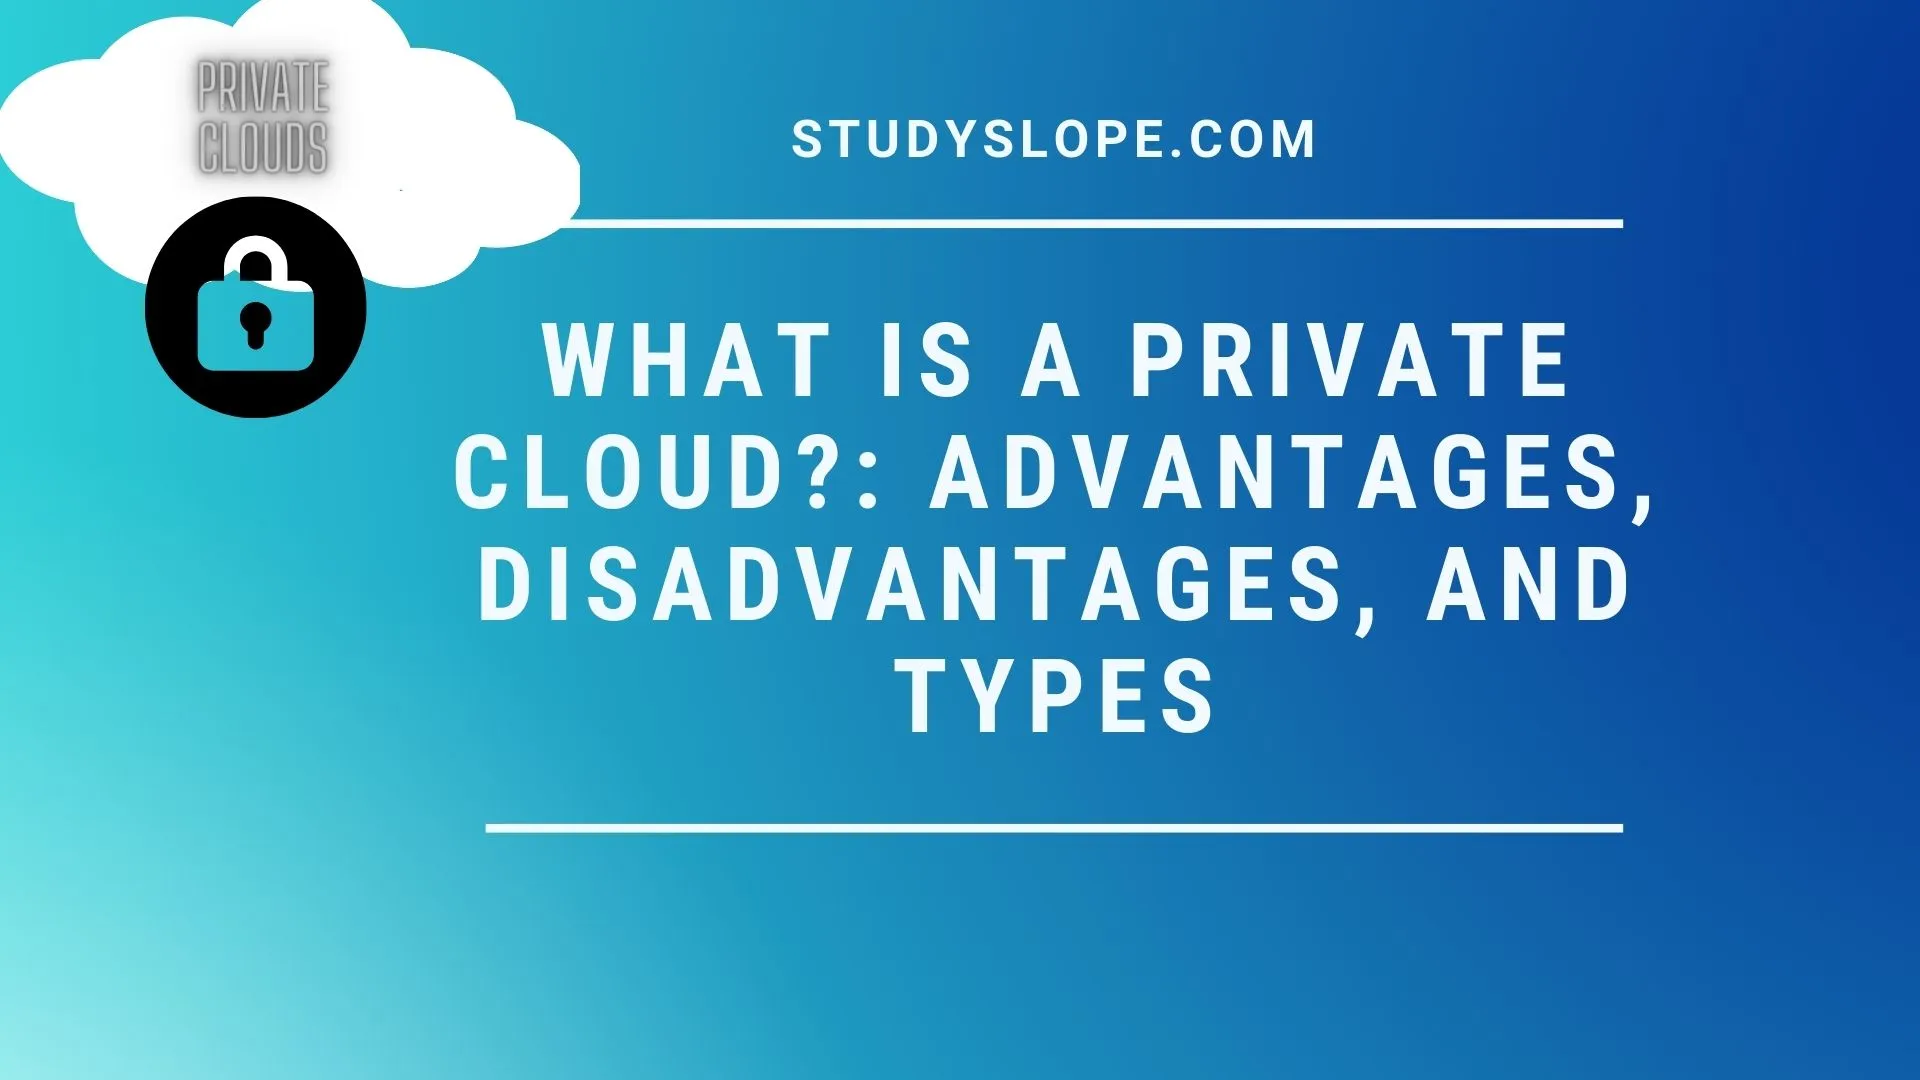 What is a Private Cloud?